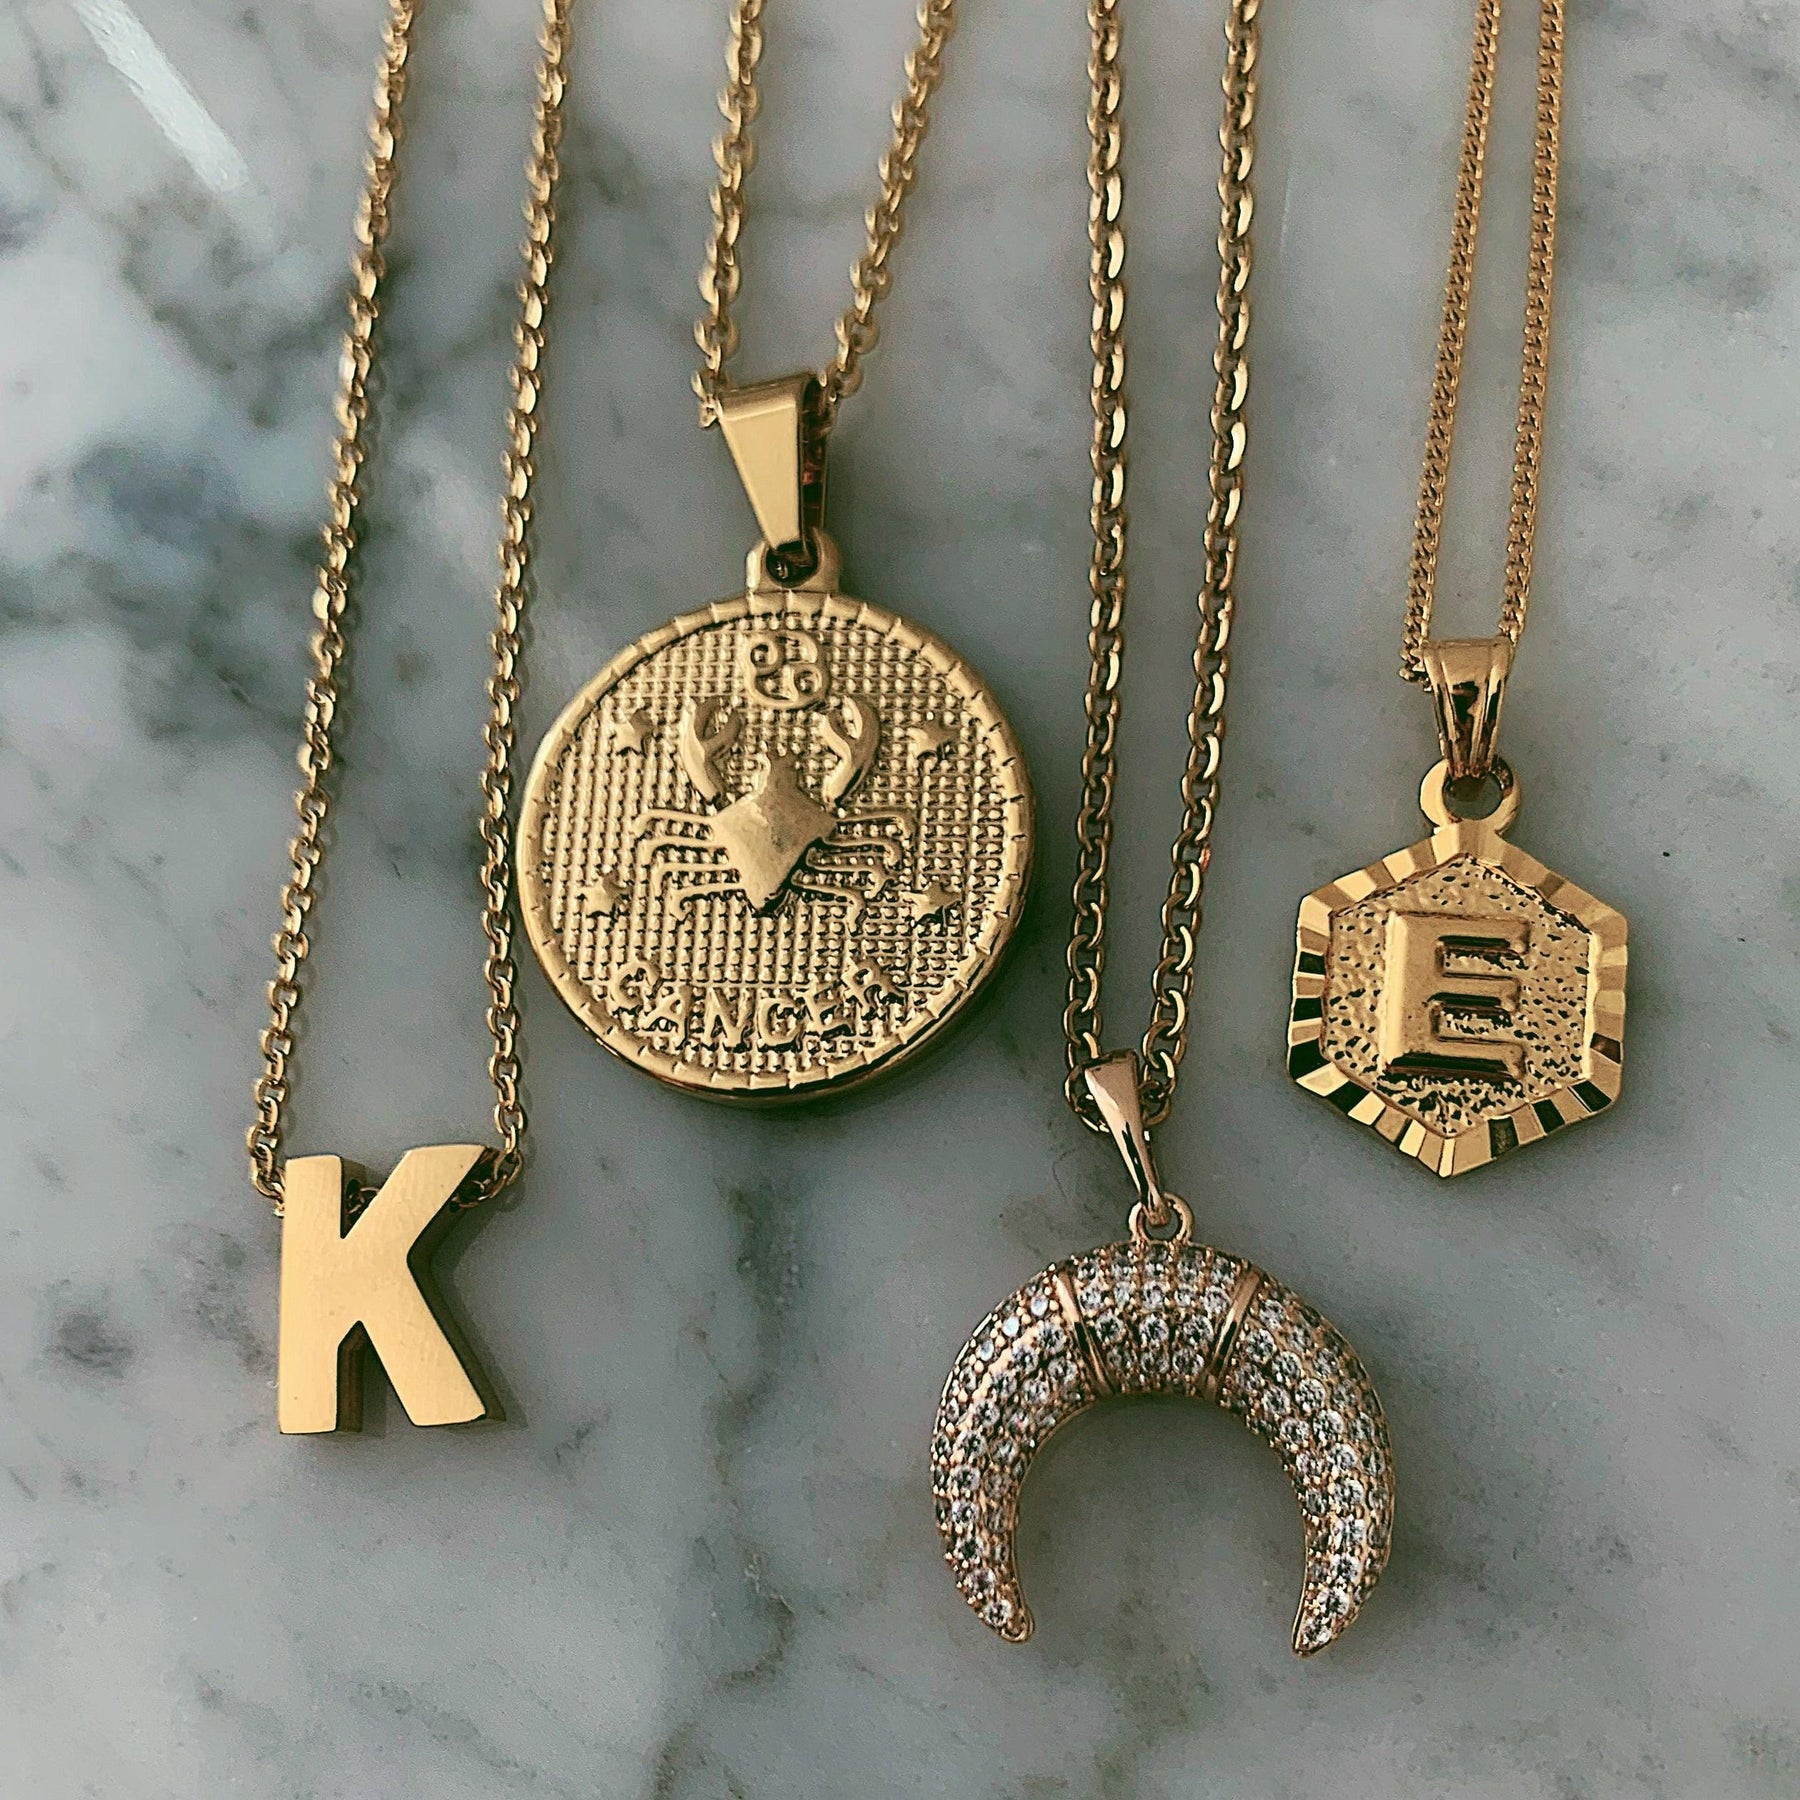 BohoMoon Stainless Steel Coin Zodiac Necklace